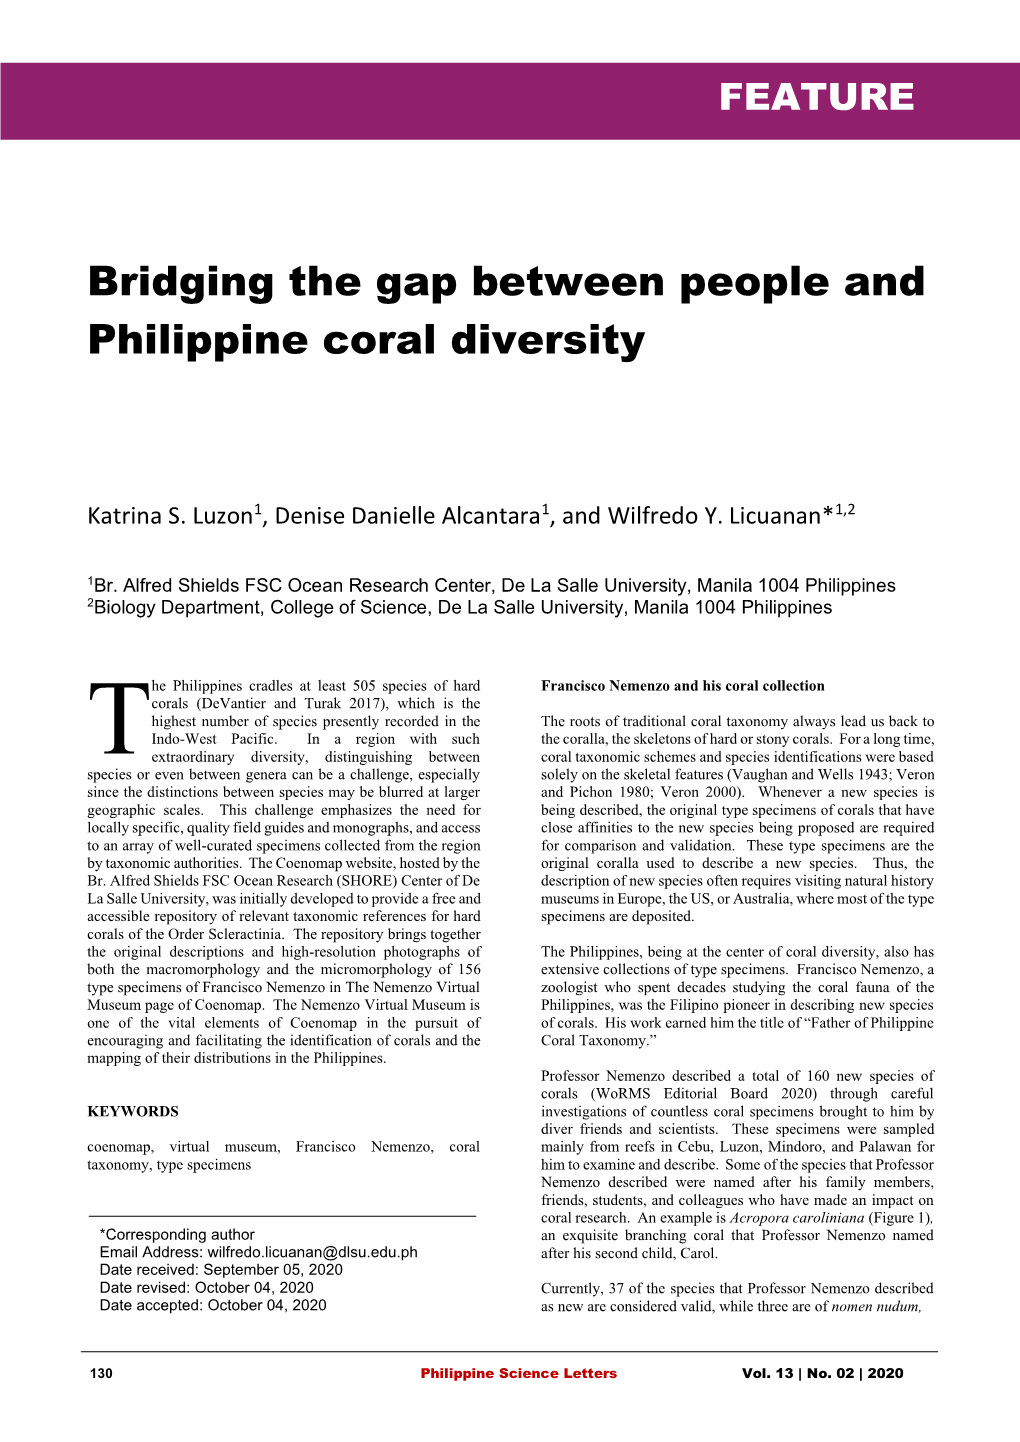 Bridging the Gap Between People and Philippine Coral Diversity